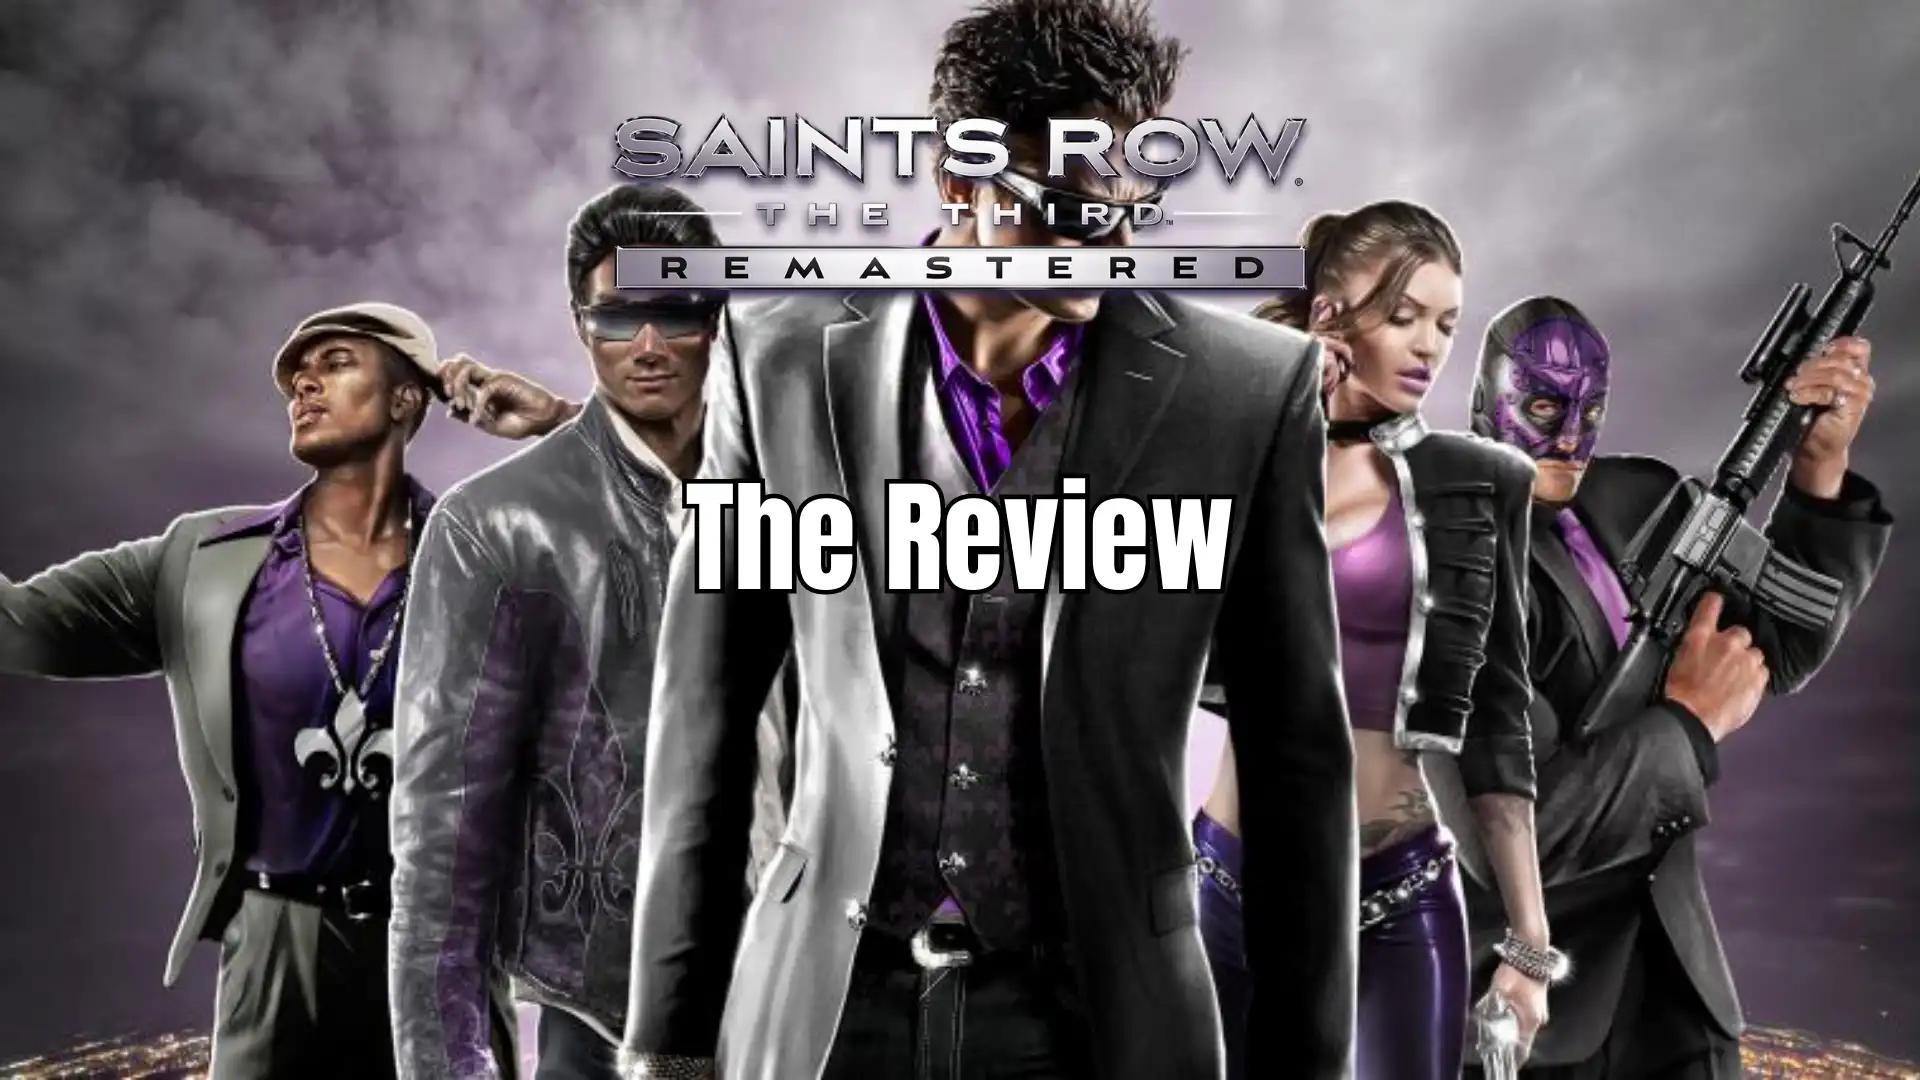 Saints Row The Third - The Review